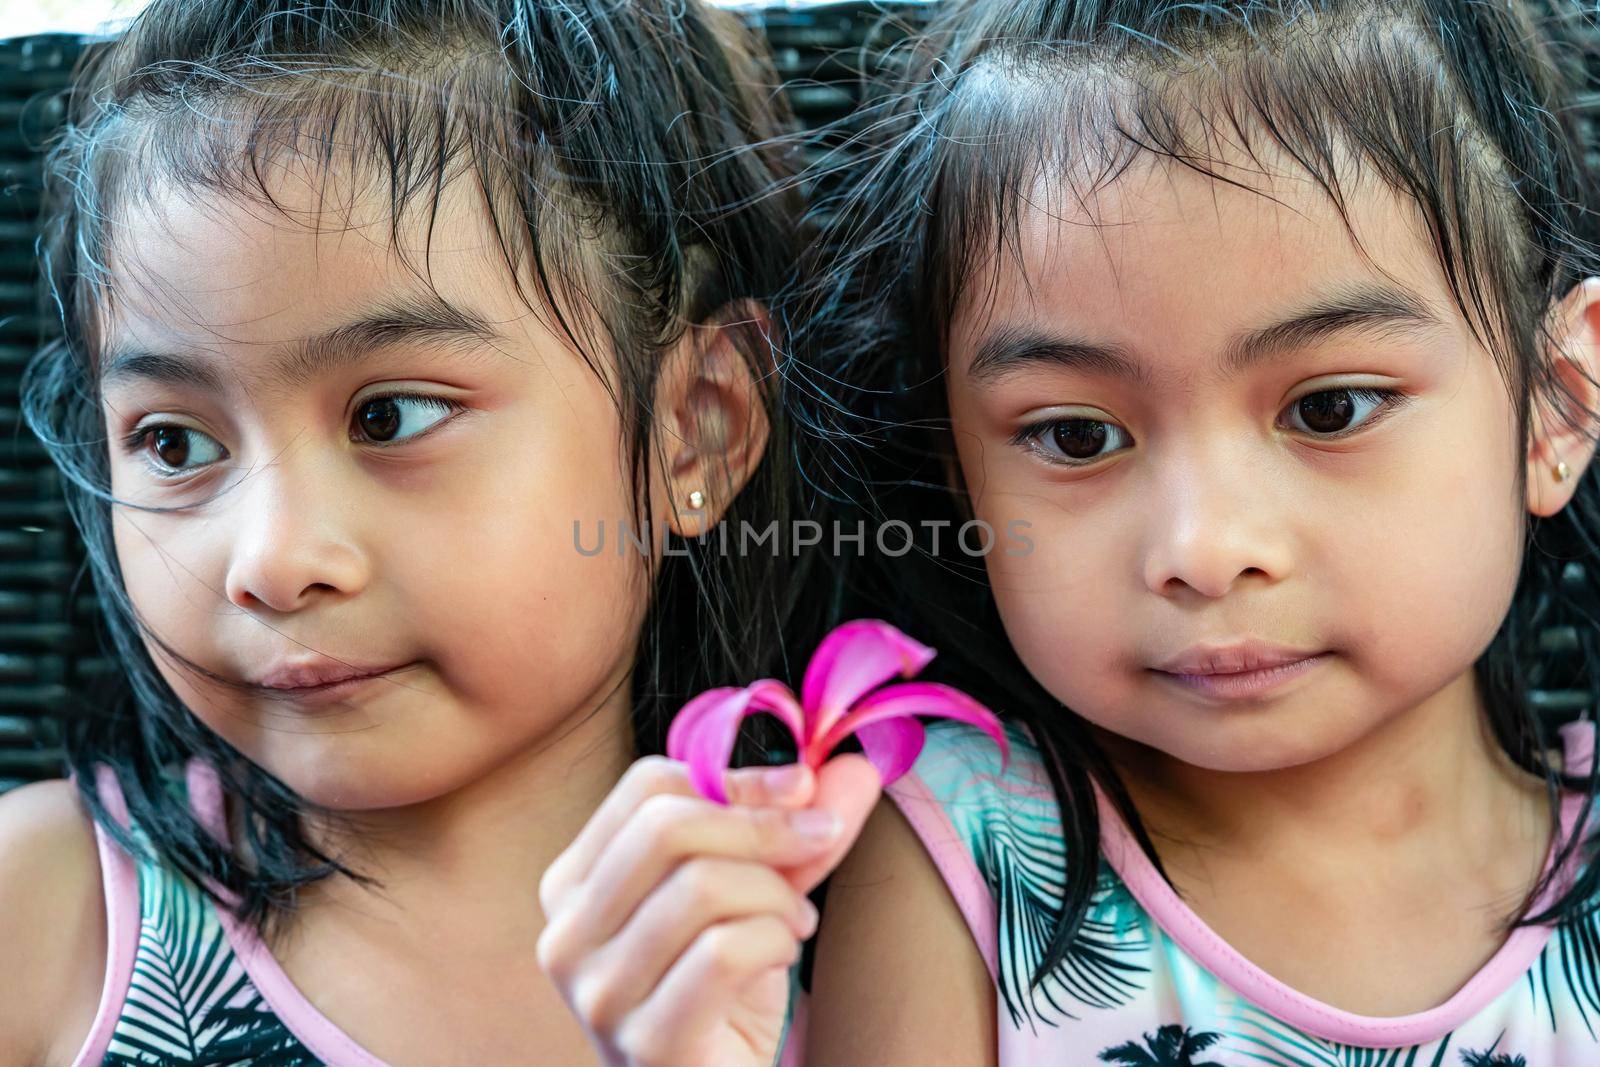 Pretty child twins holding a pink flower. Pretty asian twins portrait with flower and smiling